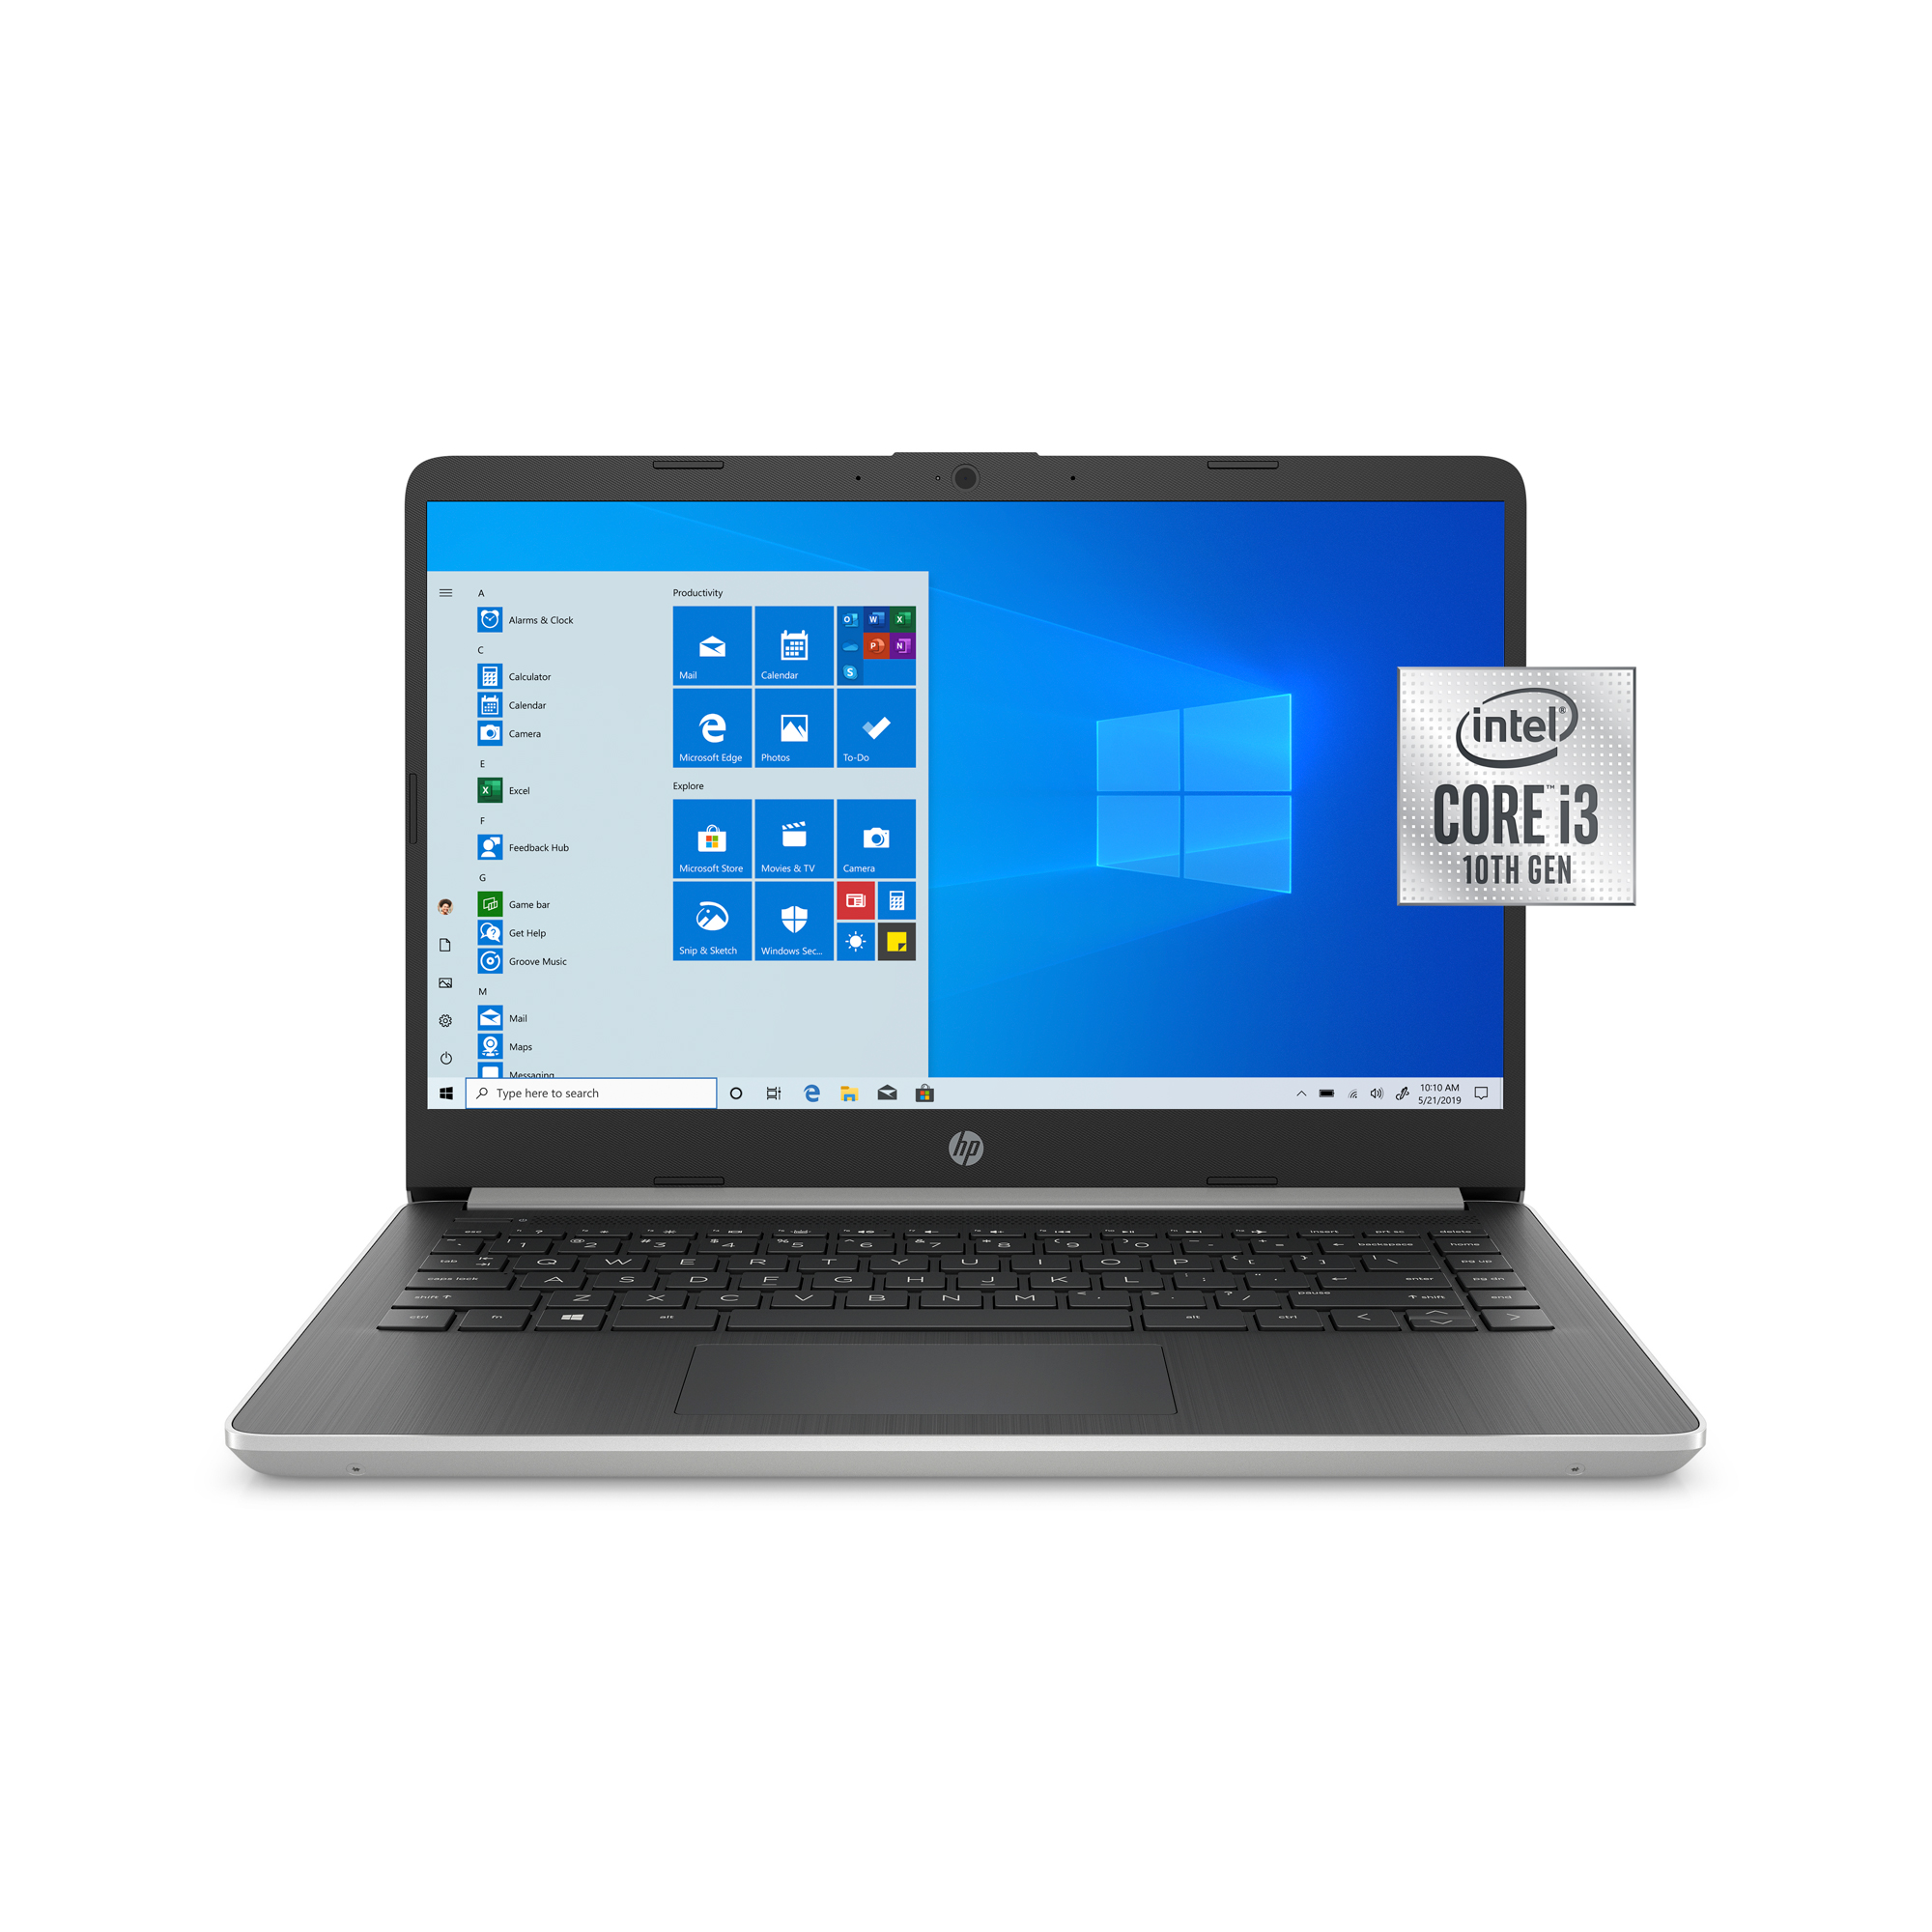 HP 14" Laptop, Intel Core i3-1005G1, 4 GB SDRAM, 128 GB M.2 Solid State Drive, Natural Silver, 14-DQ1037wm - image 1 of 9